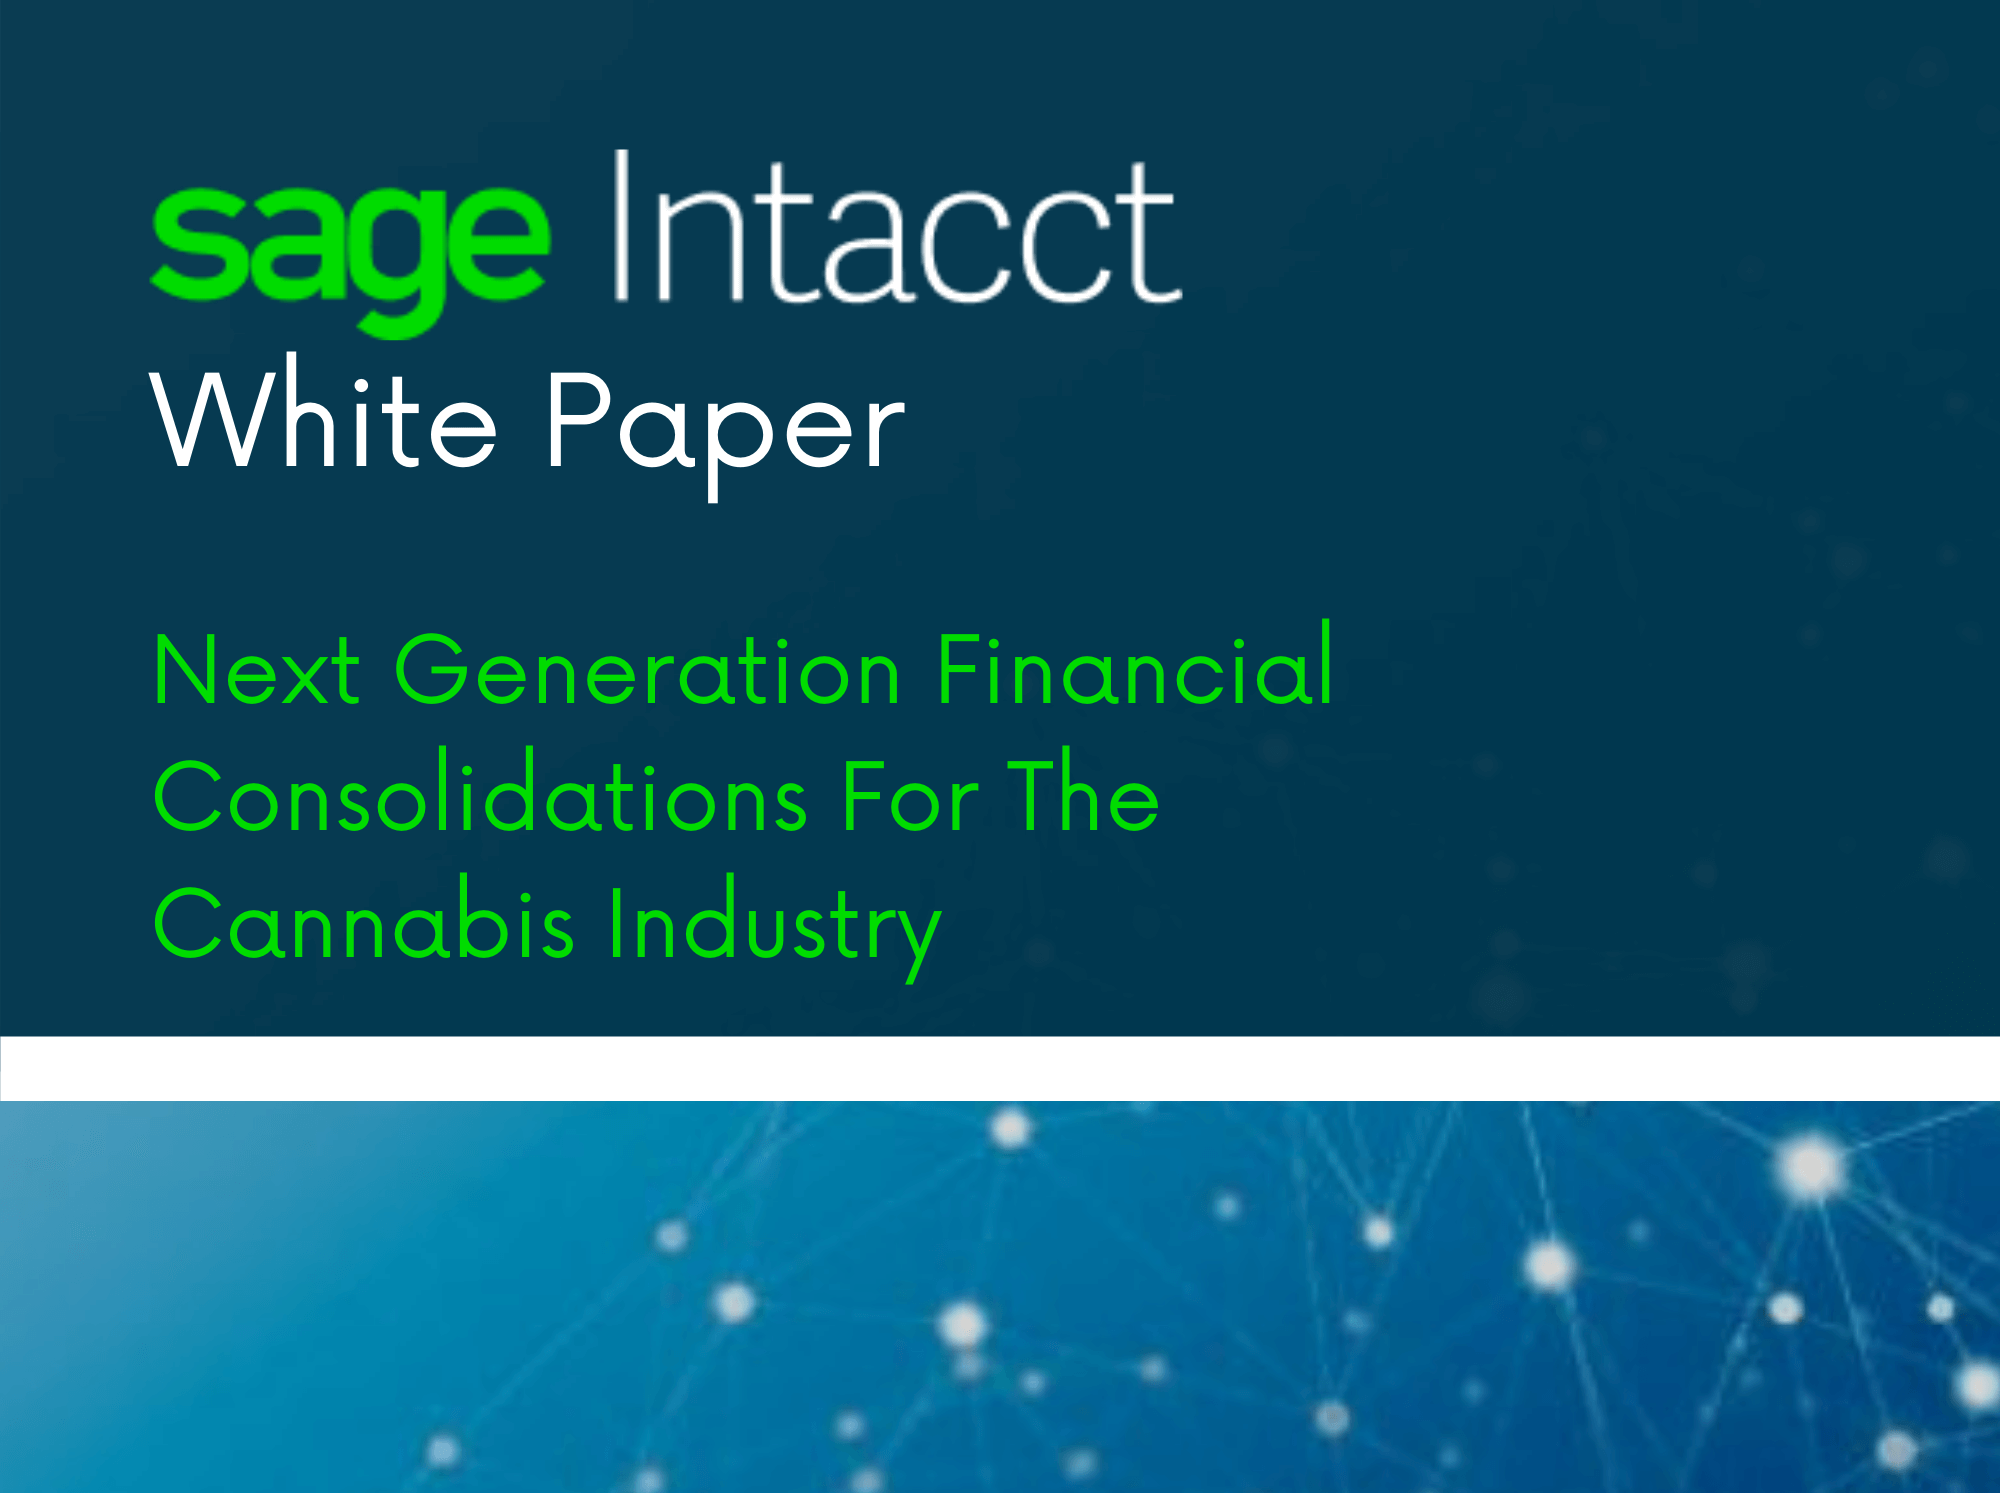 Next Generation Financial Consolidations for the Cannabis Industry